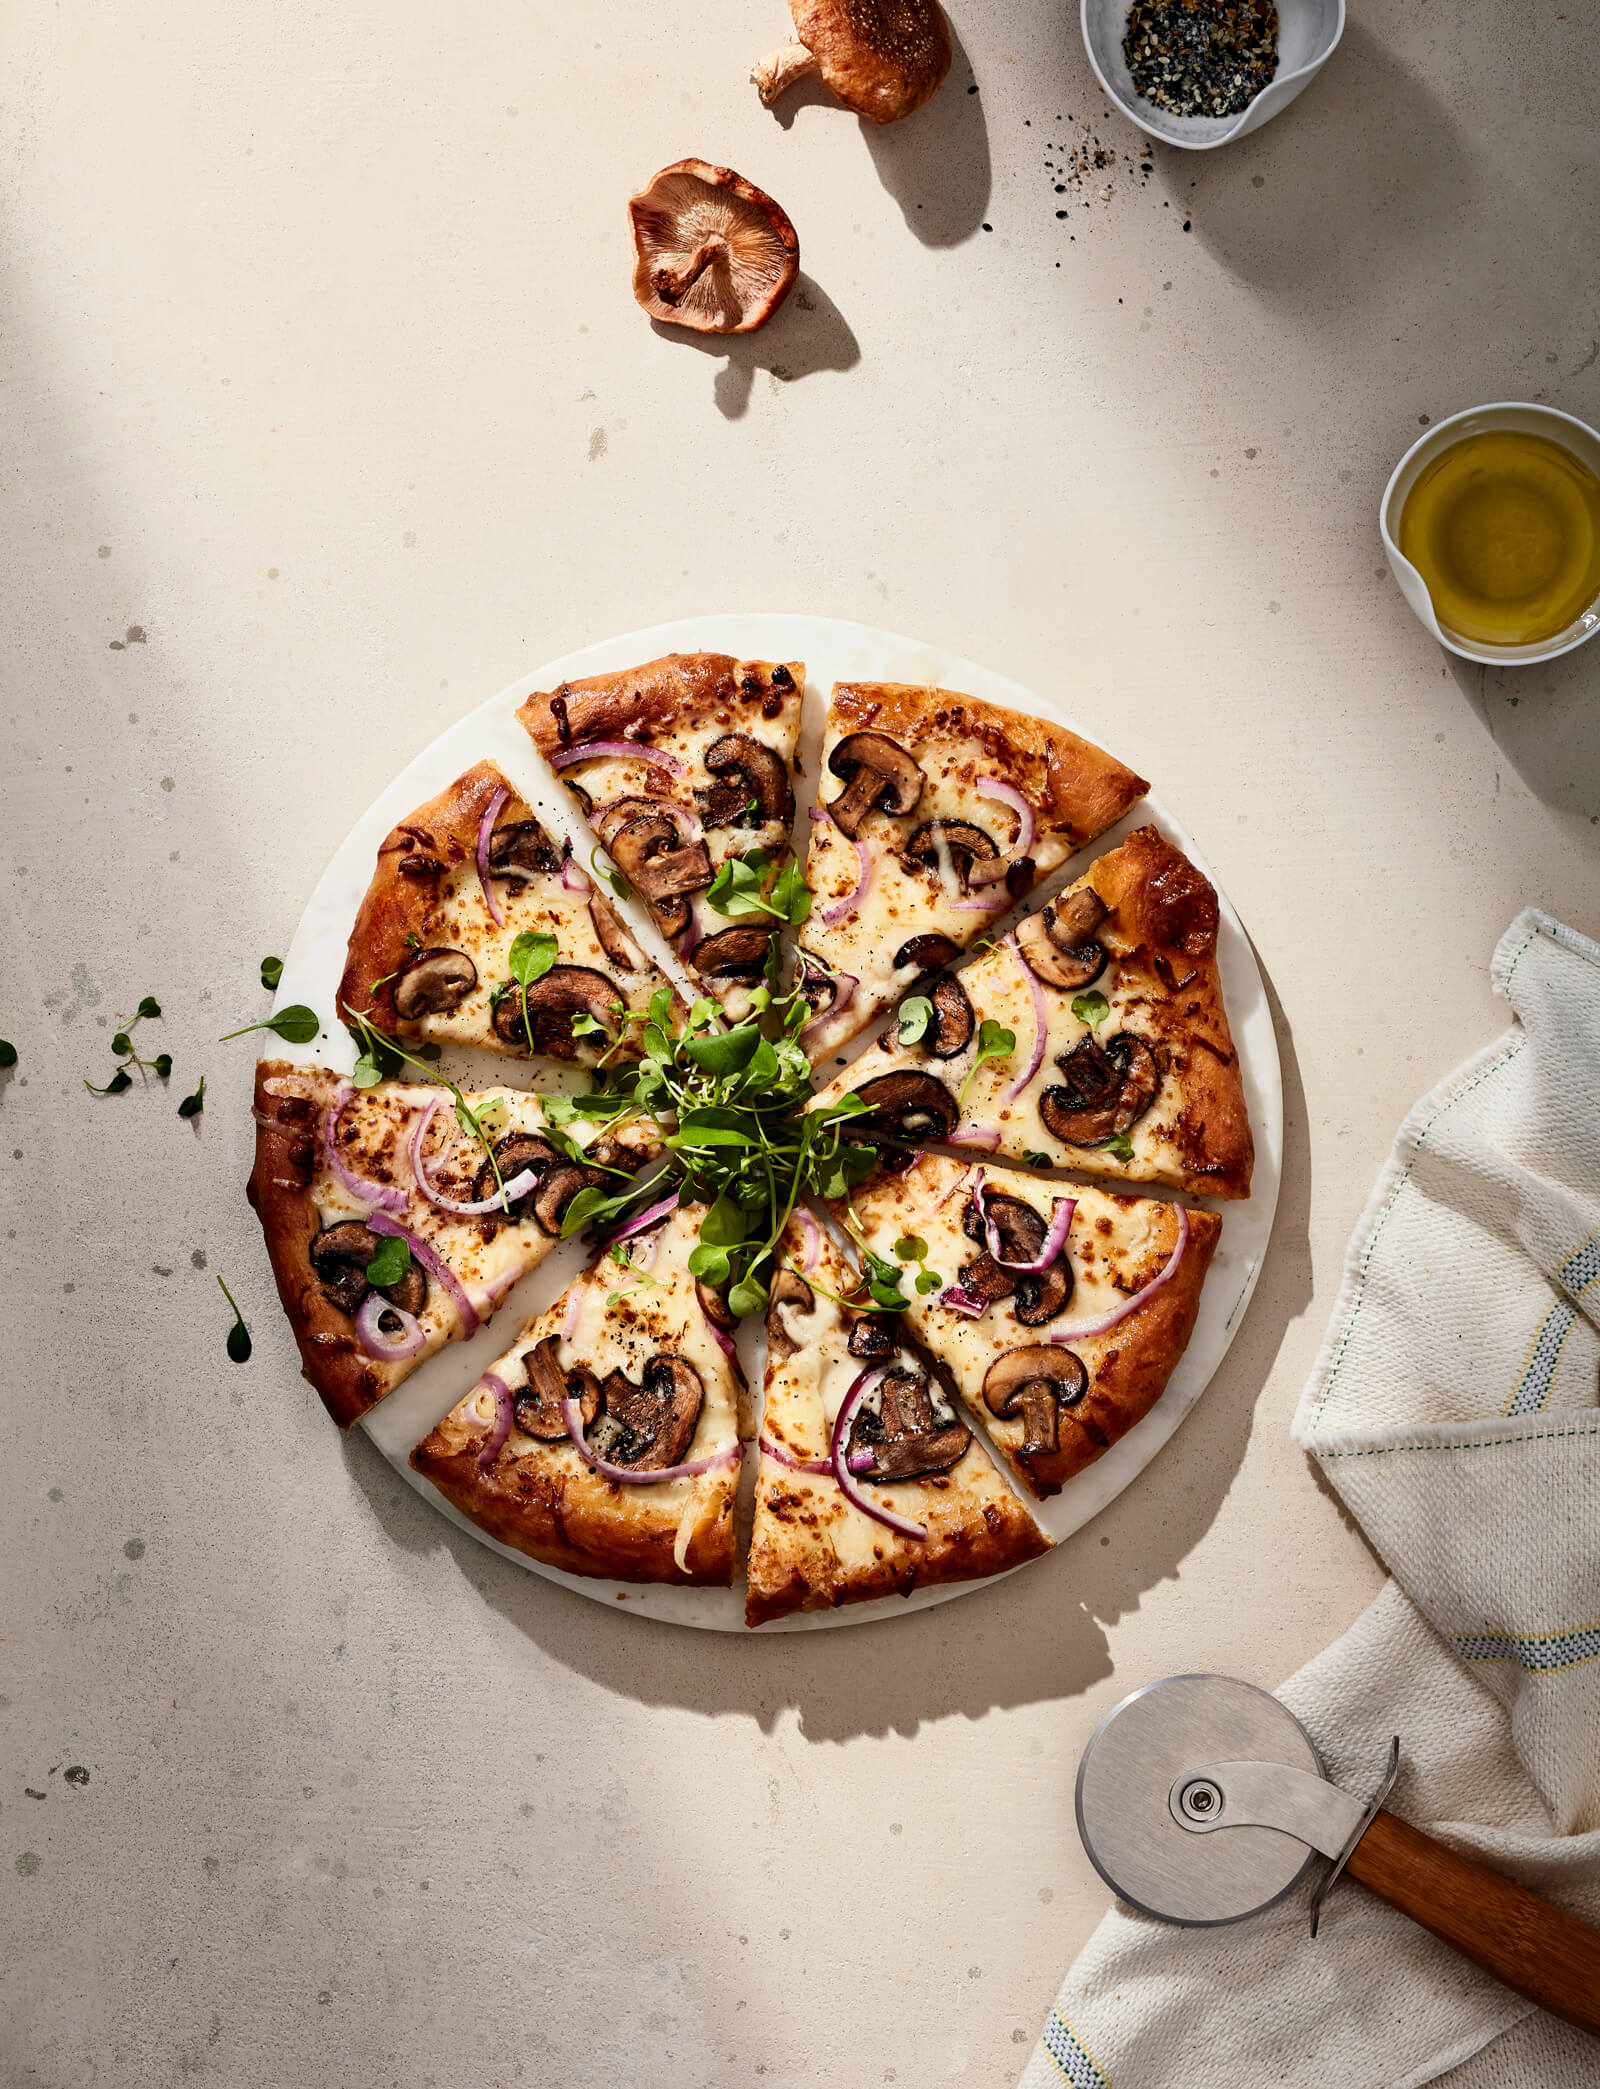 pizza | natural surface | daylight | food photography | still life 